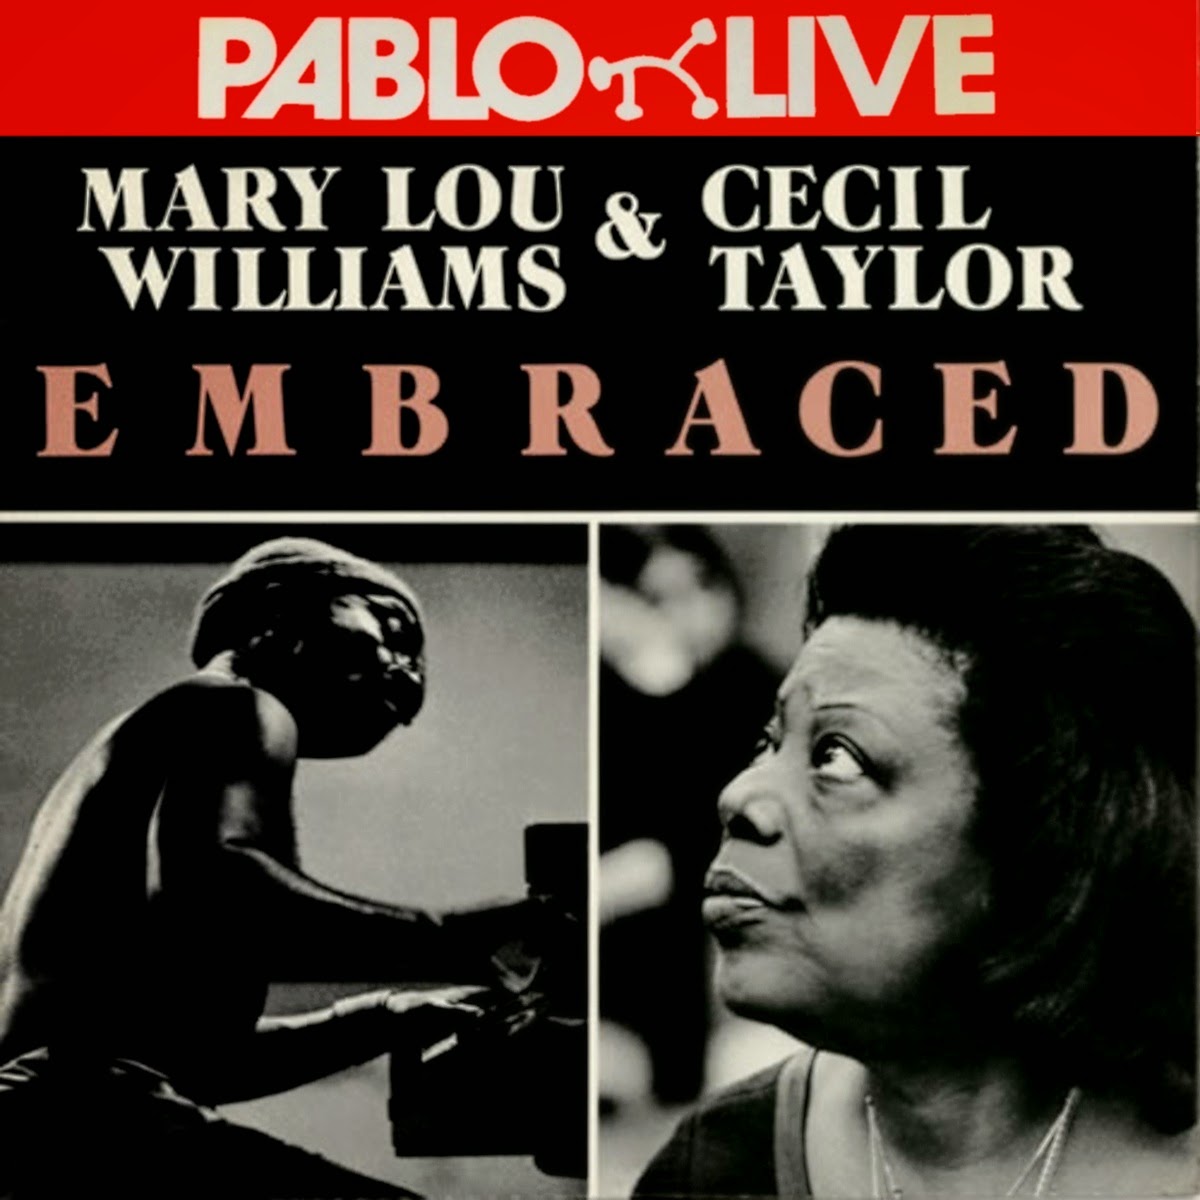 MARY LOU WILLIAMS & CECIL TAYLOR - Embraced (Pablo Live/2LP-1978) .